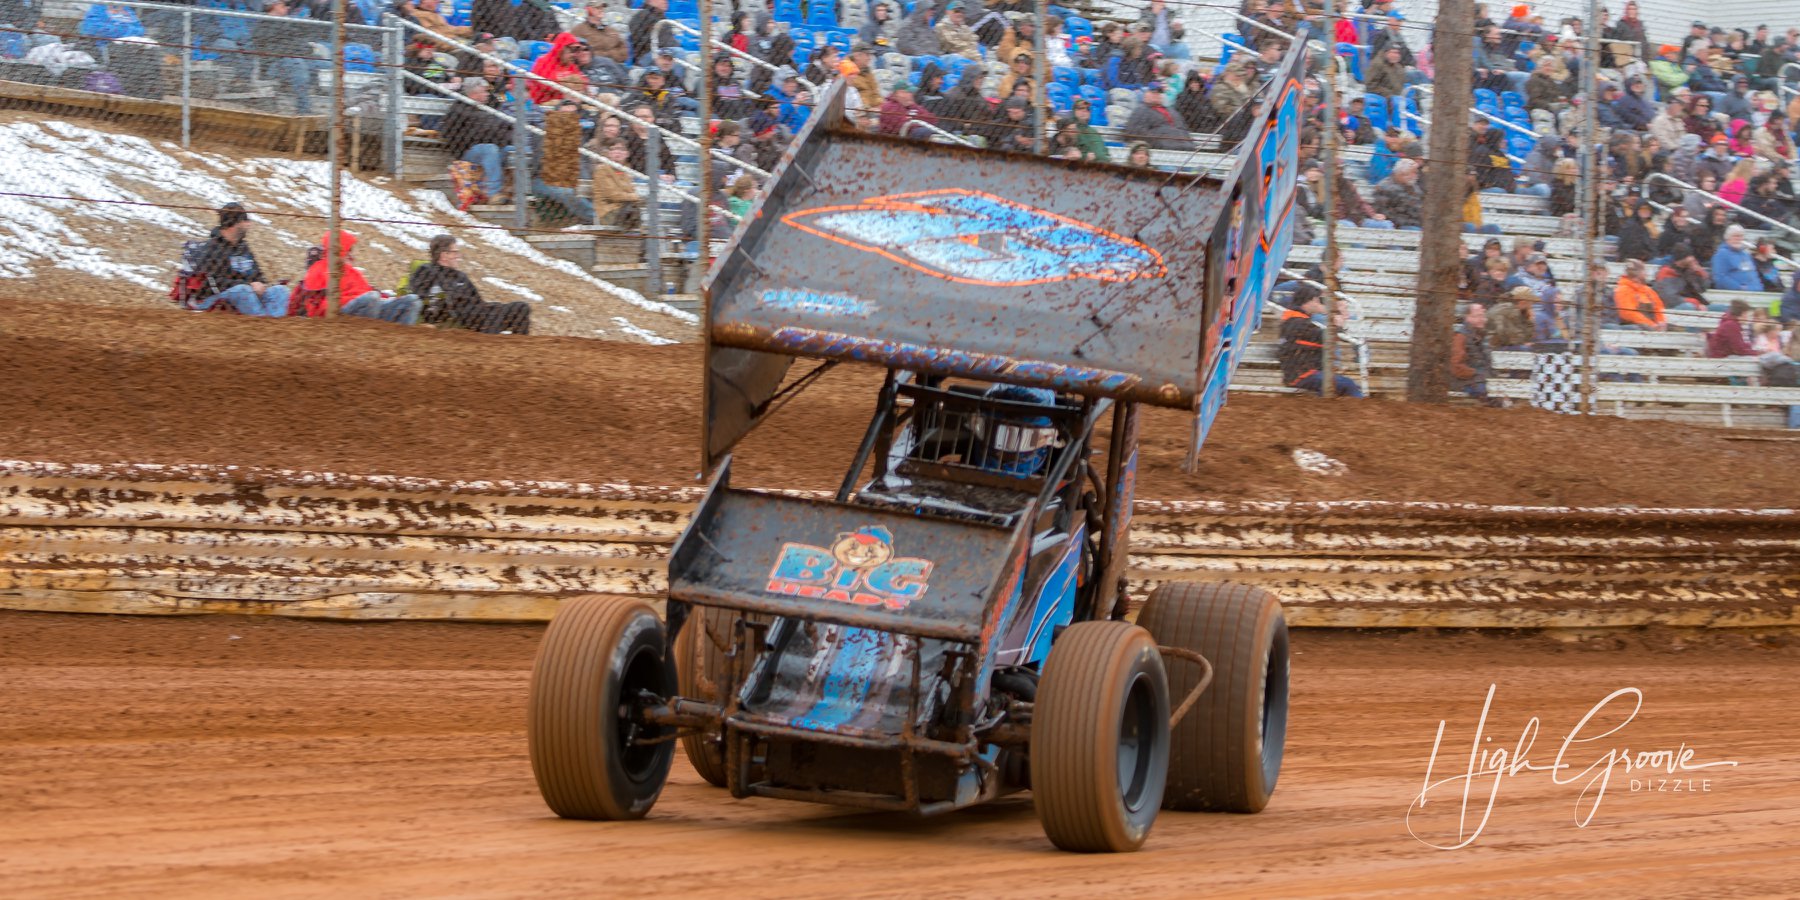 Michalski improves to finish 13th at Lincoln Speedway